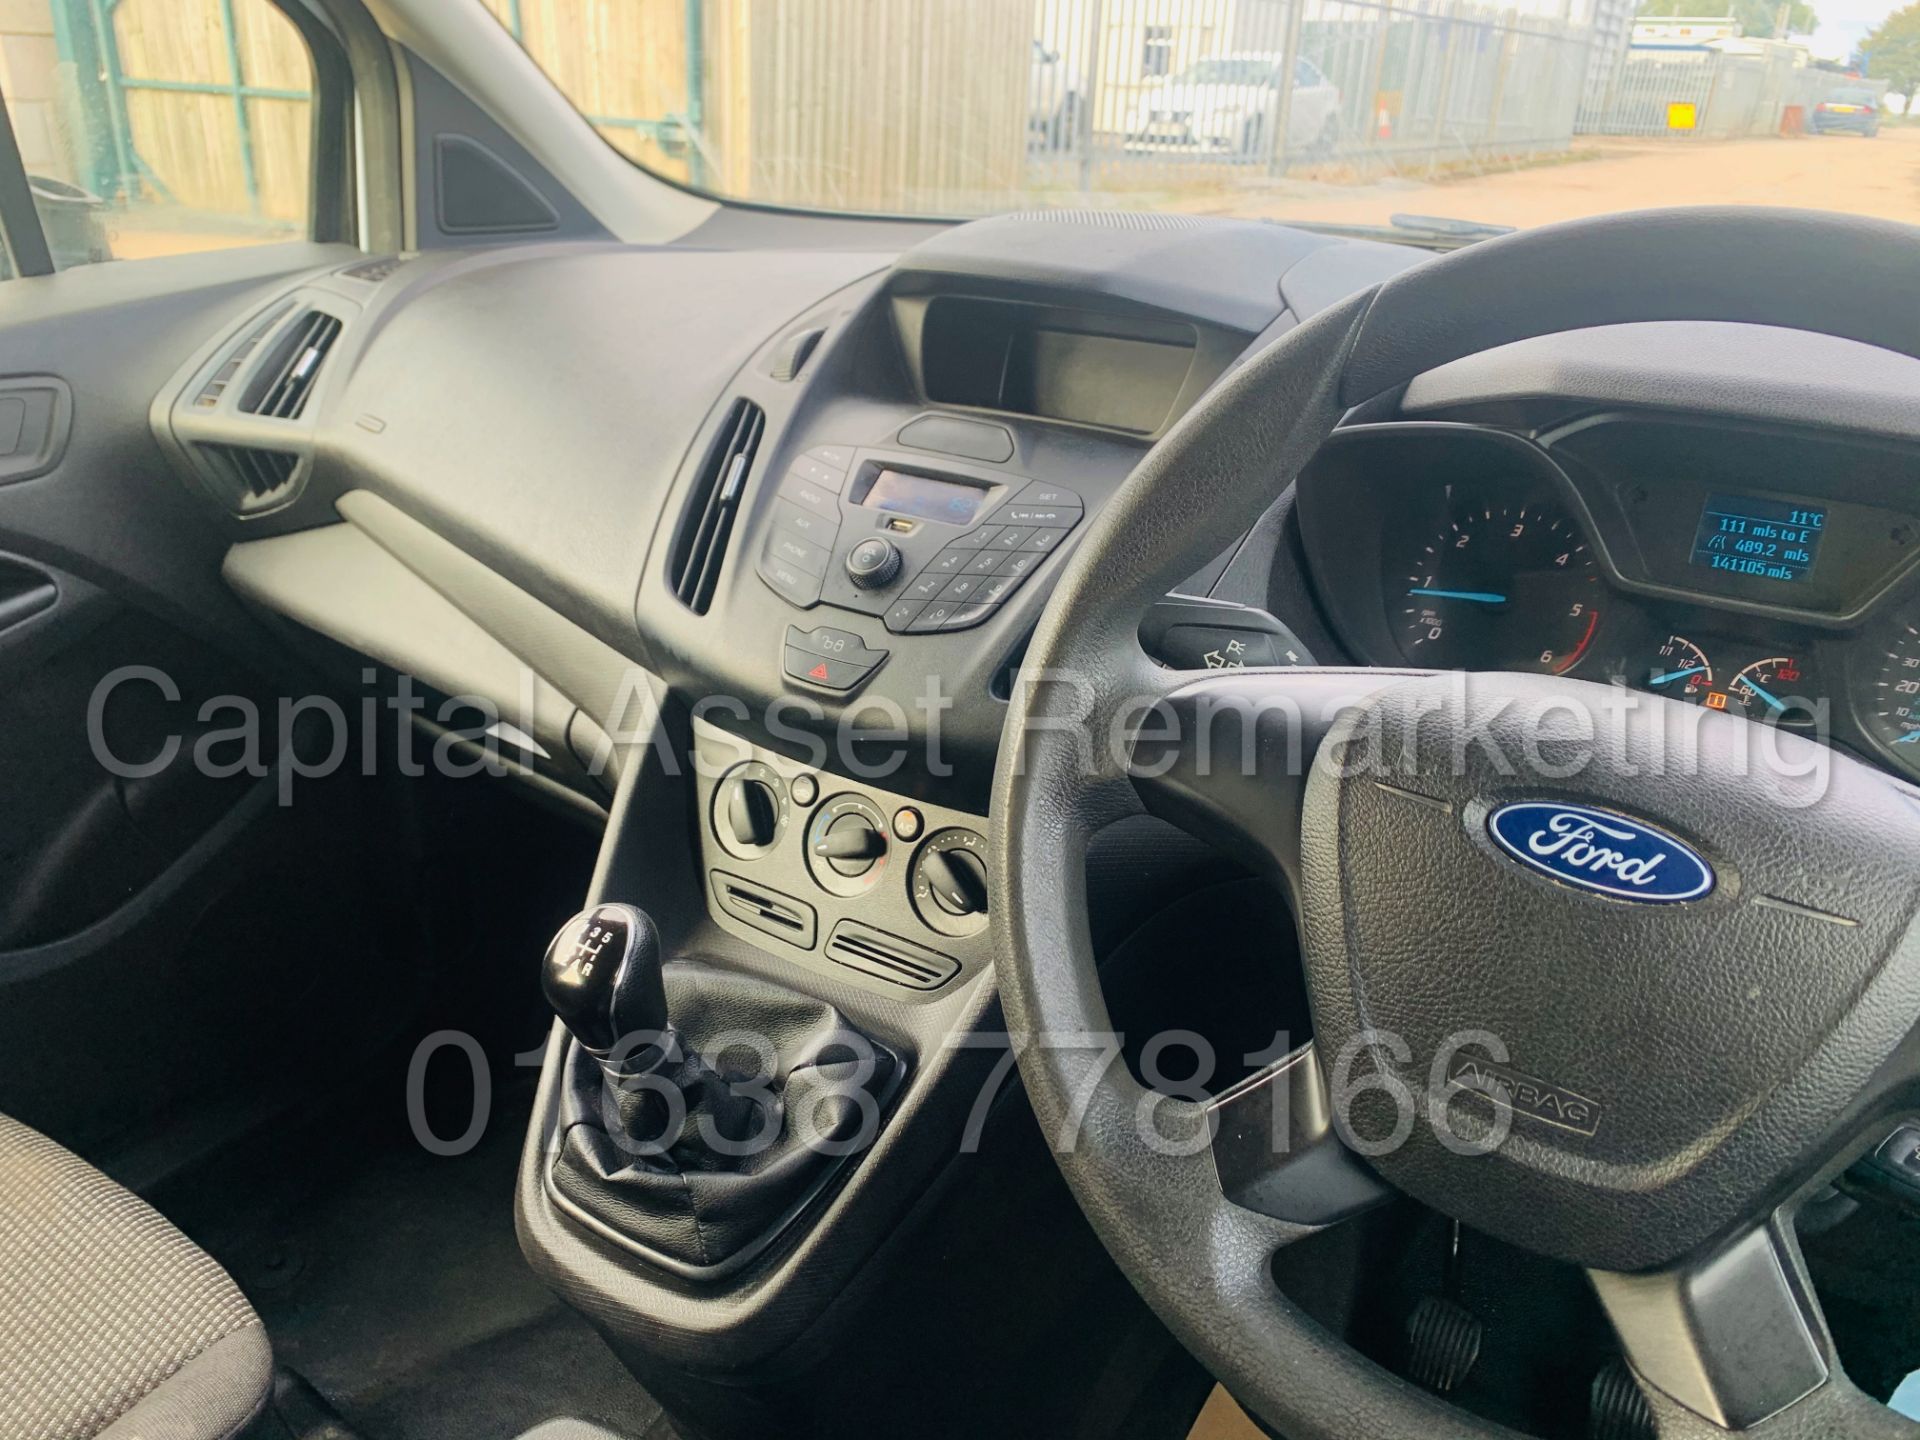 (On Sale) FORD TRANSIT CONNECT *LWB - 5 SEATER CREW VAN* (67 REG - EURO 6) 1.5 TDCI *A/C* (1 OWNER) - Image 32 of 40